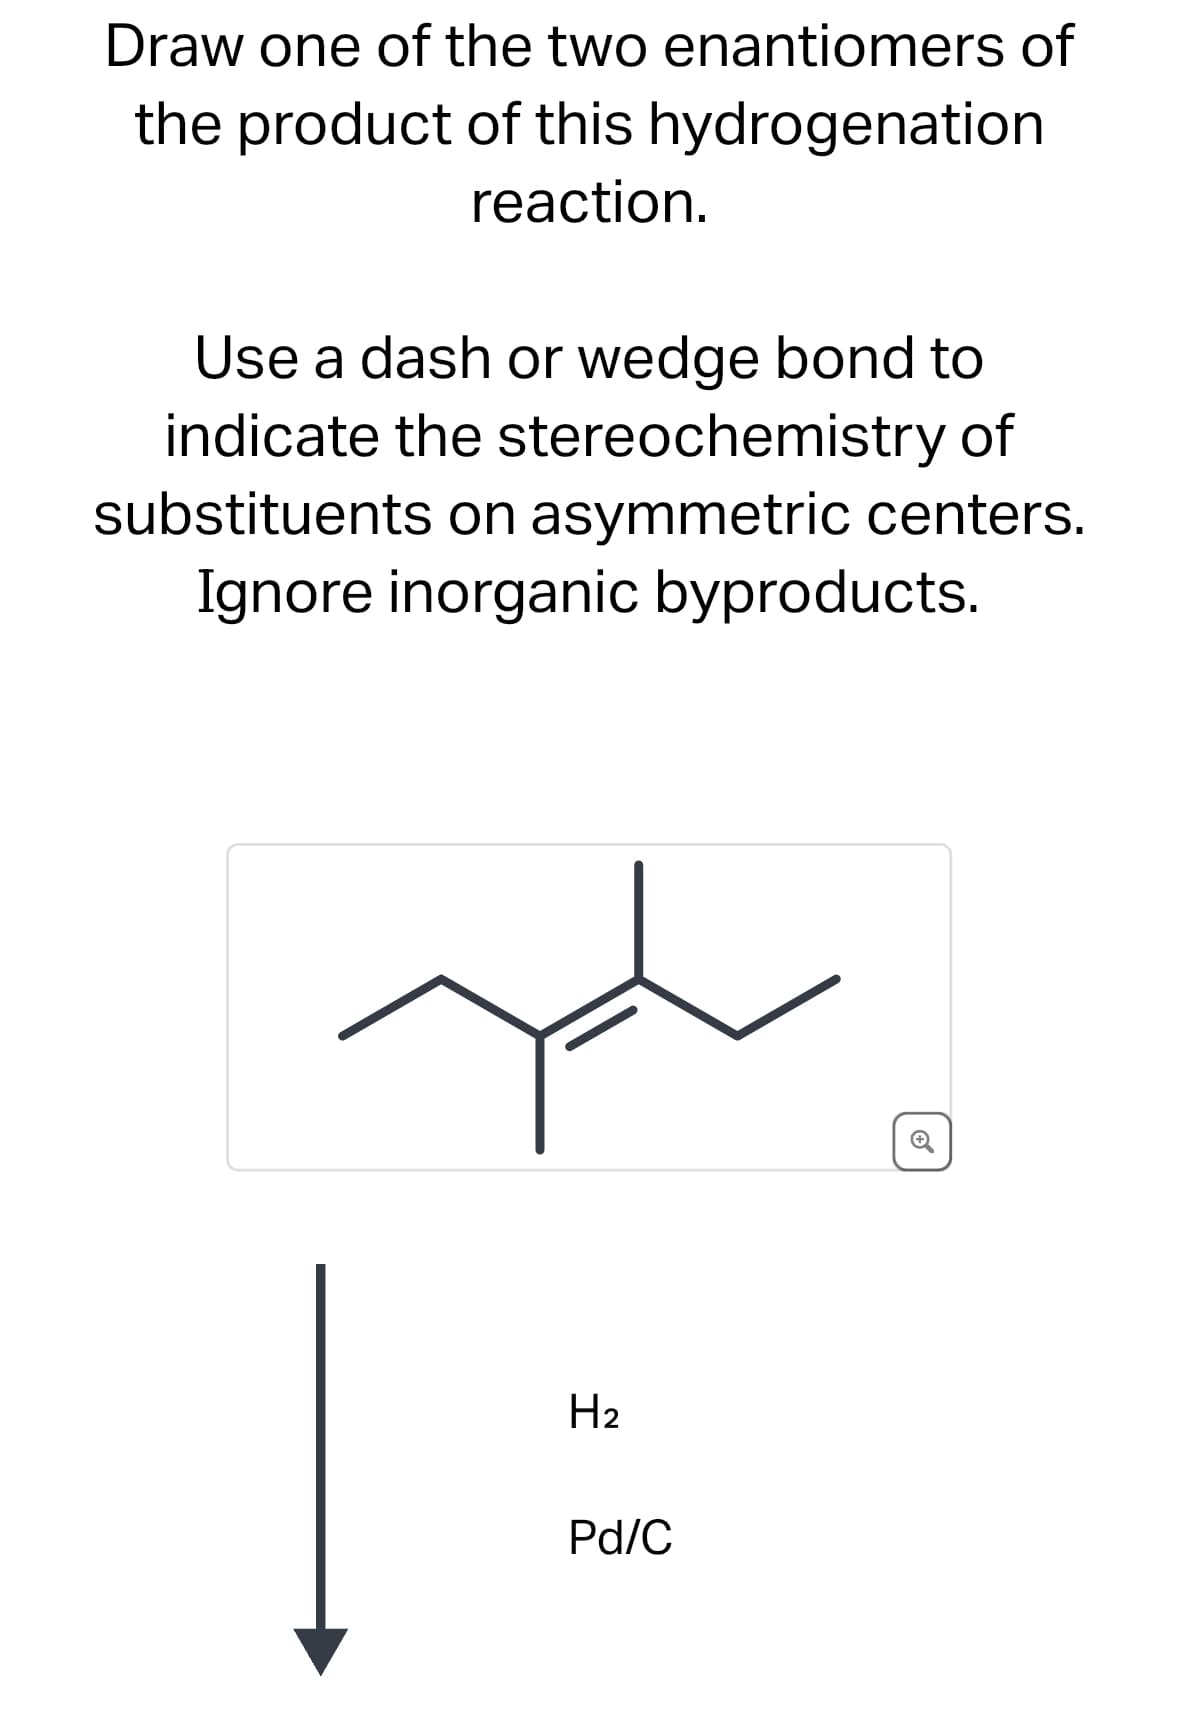 Draw one of the two enantiomers of
the product of this hydrogenation
reaction.
Use a dash or wedge bond to
indicate the stereochemistry of
substituents on asymmetric centers.
Ignore inorganic byproducts.
H2
Pd/C